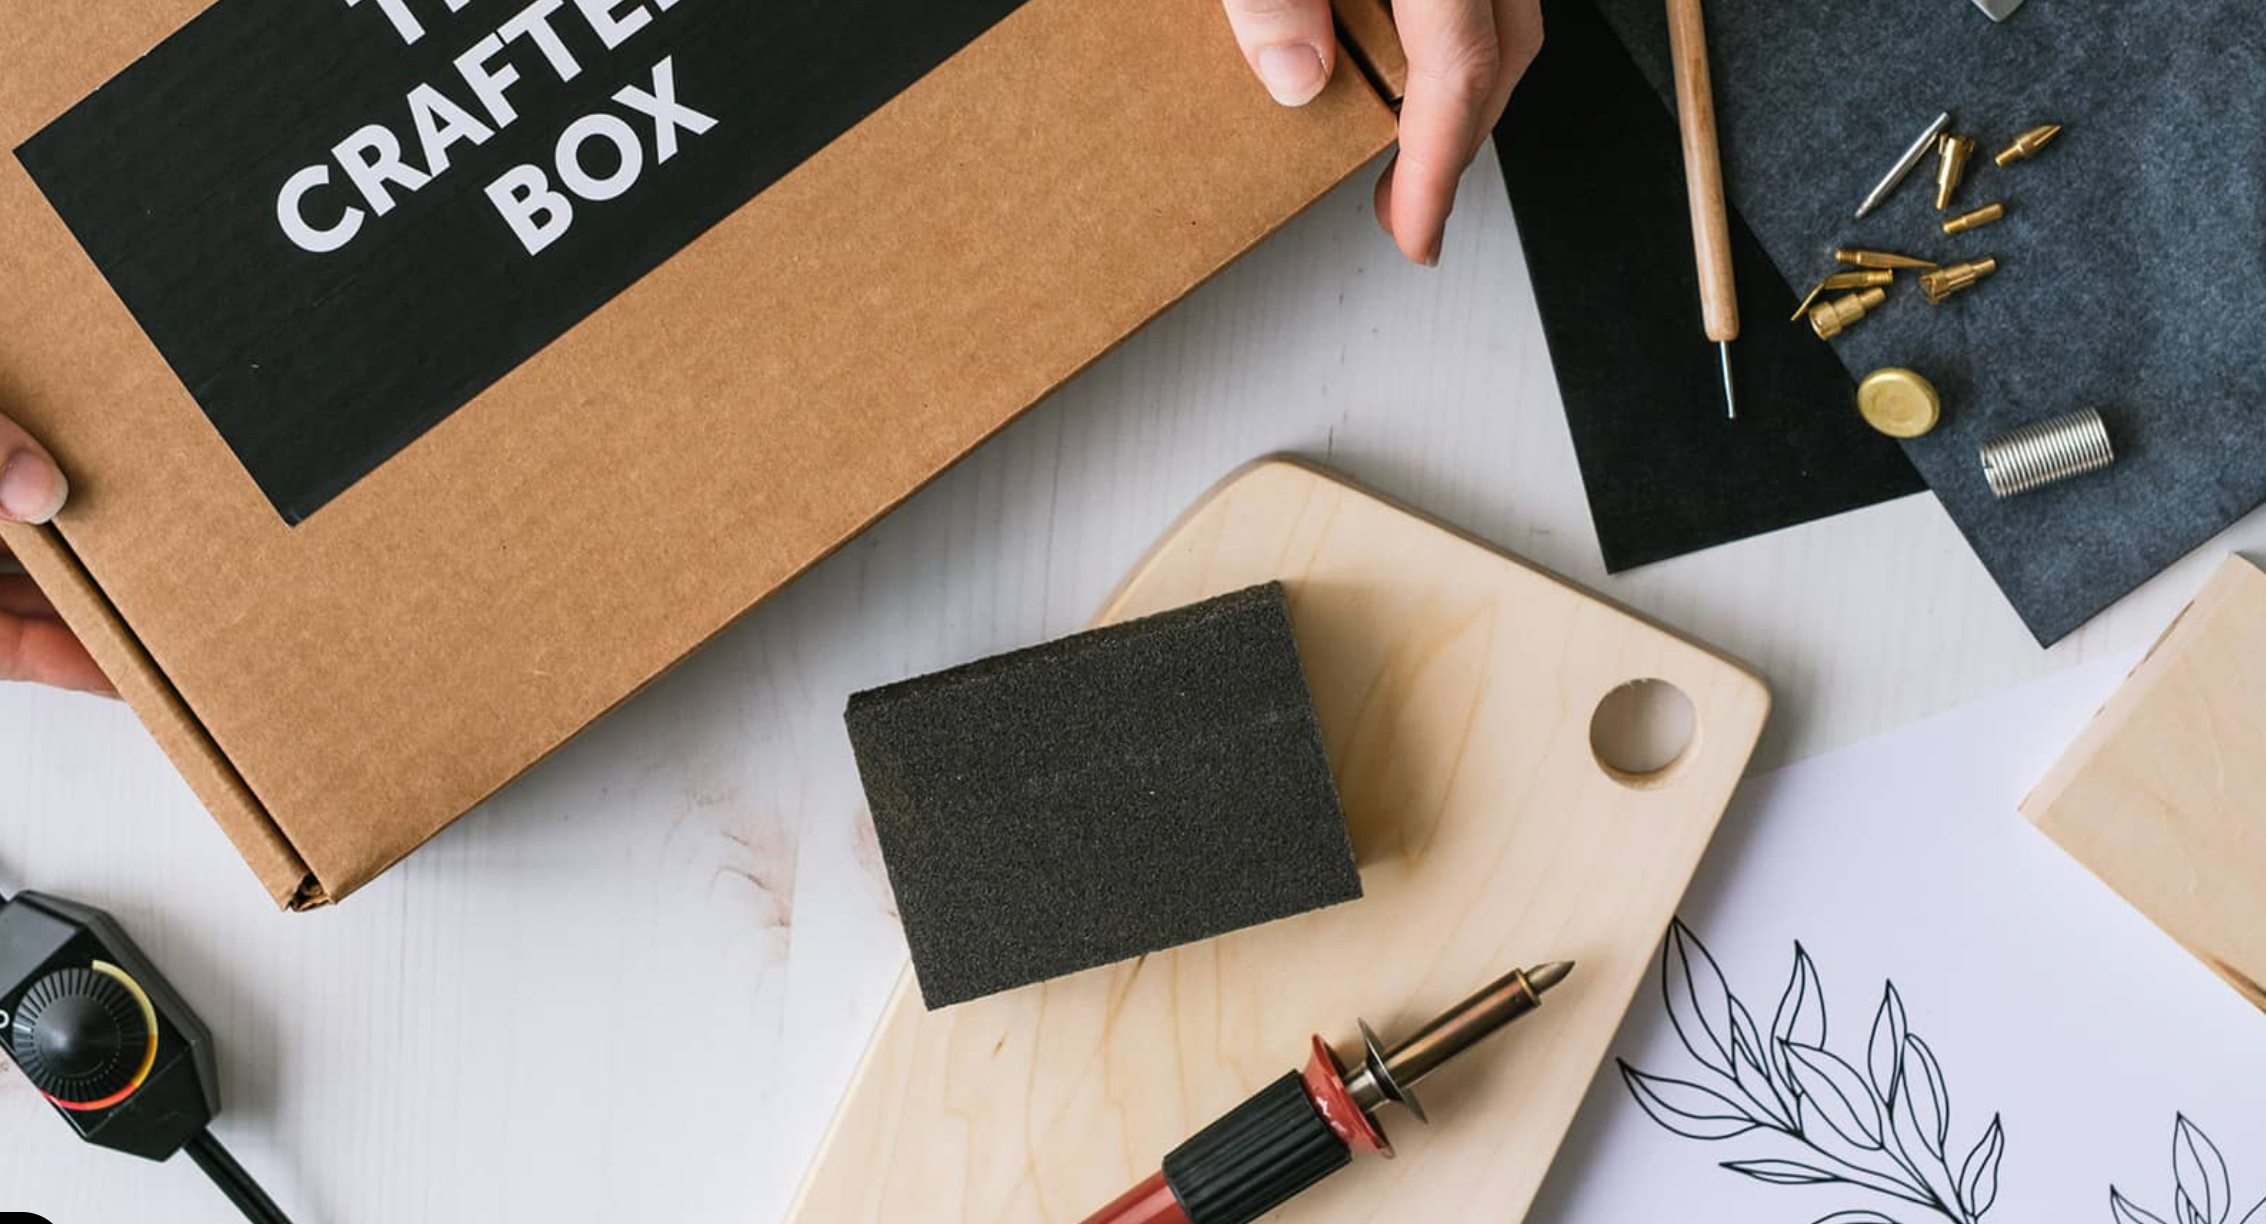 Explore Wood Burning with Artist Rachel Strauss, The Crafter's Box